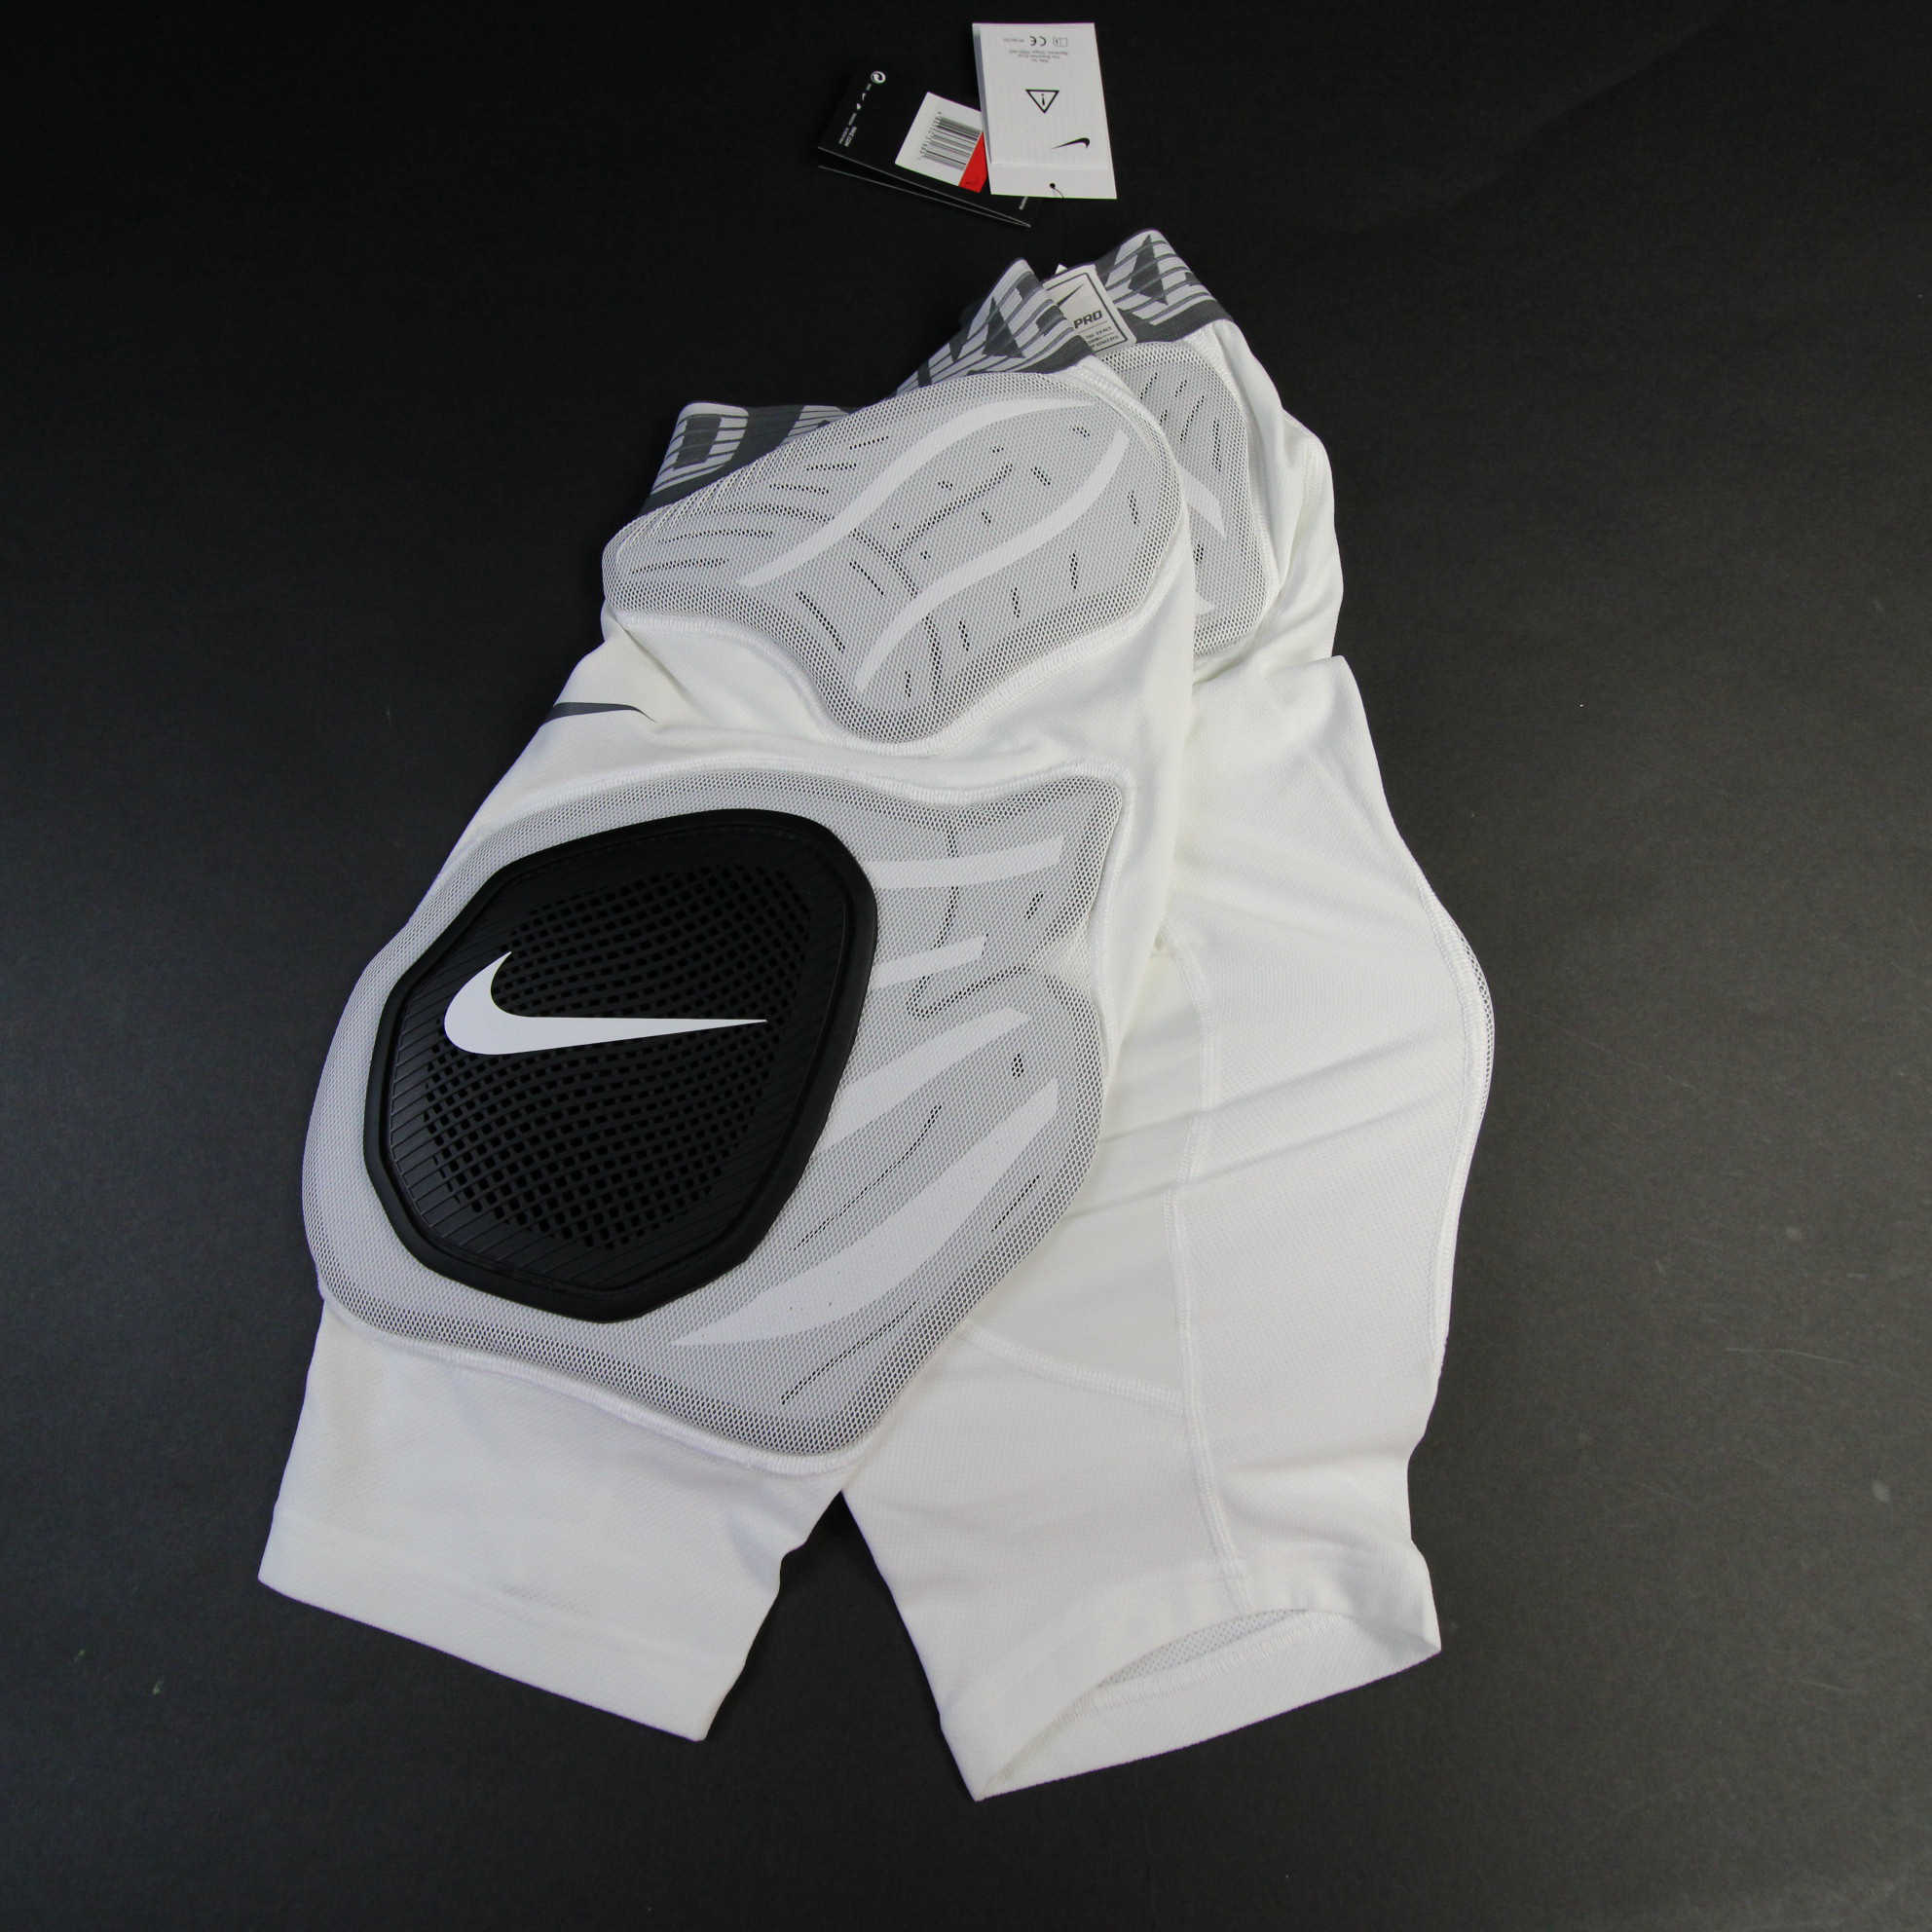 Nike Pro Hyperstrong Padded Compression Shorts Men's White New with Tags -  Helia Beer Co